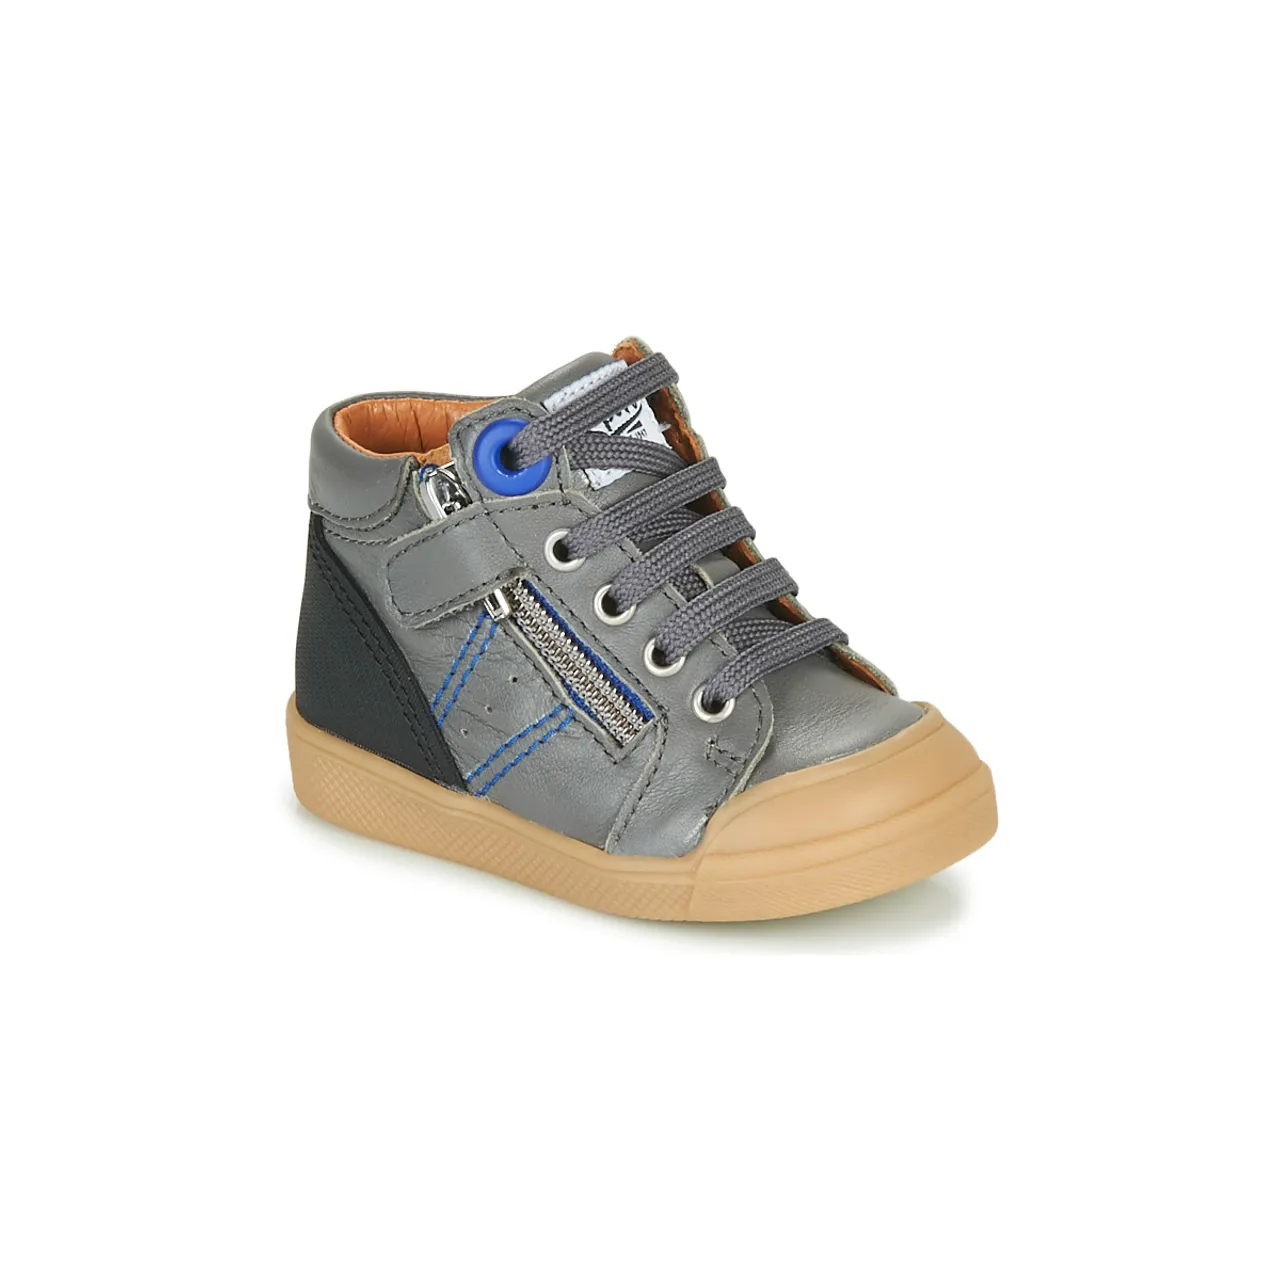 GBB  ANATOLE  boys's Children's Shoes (High-top Trainers) in Grey